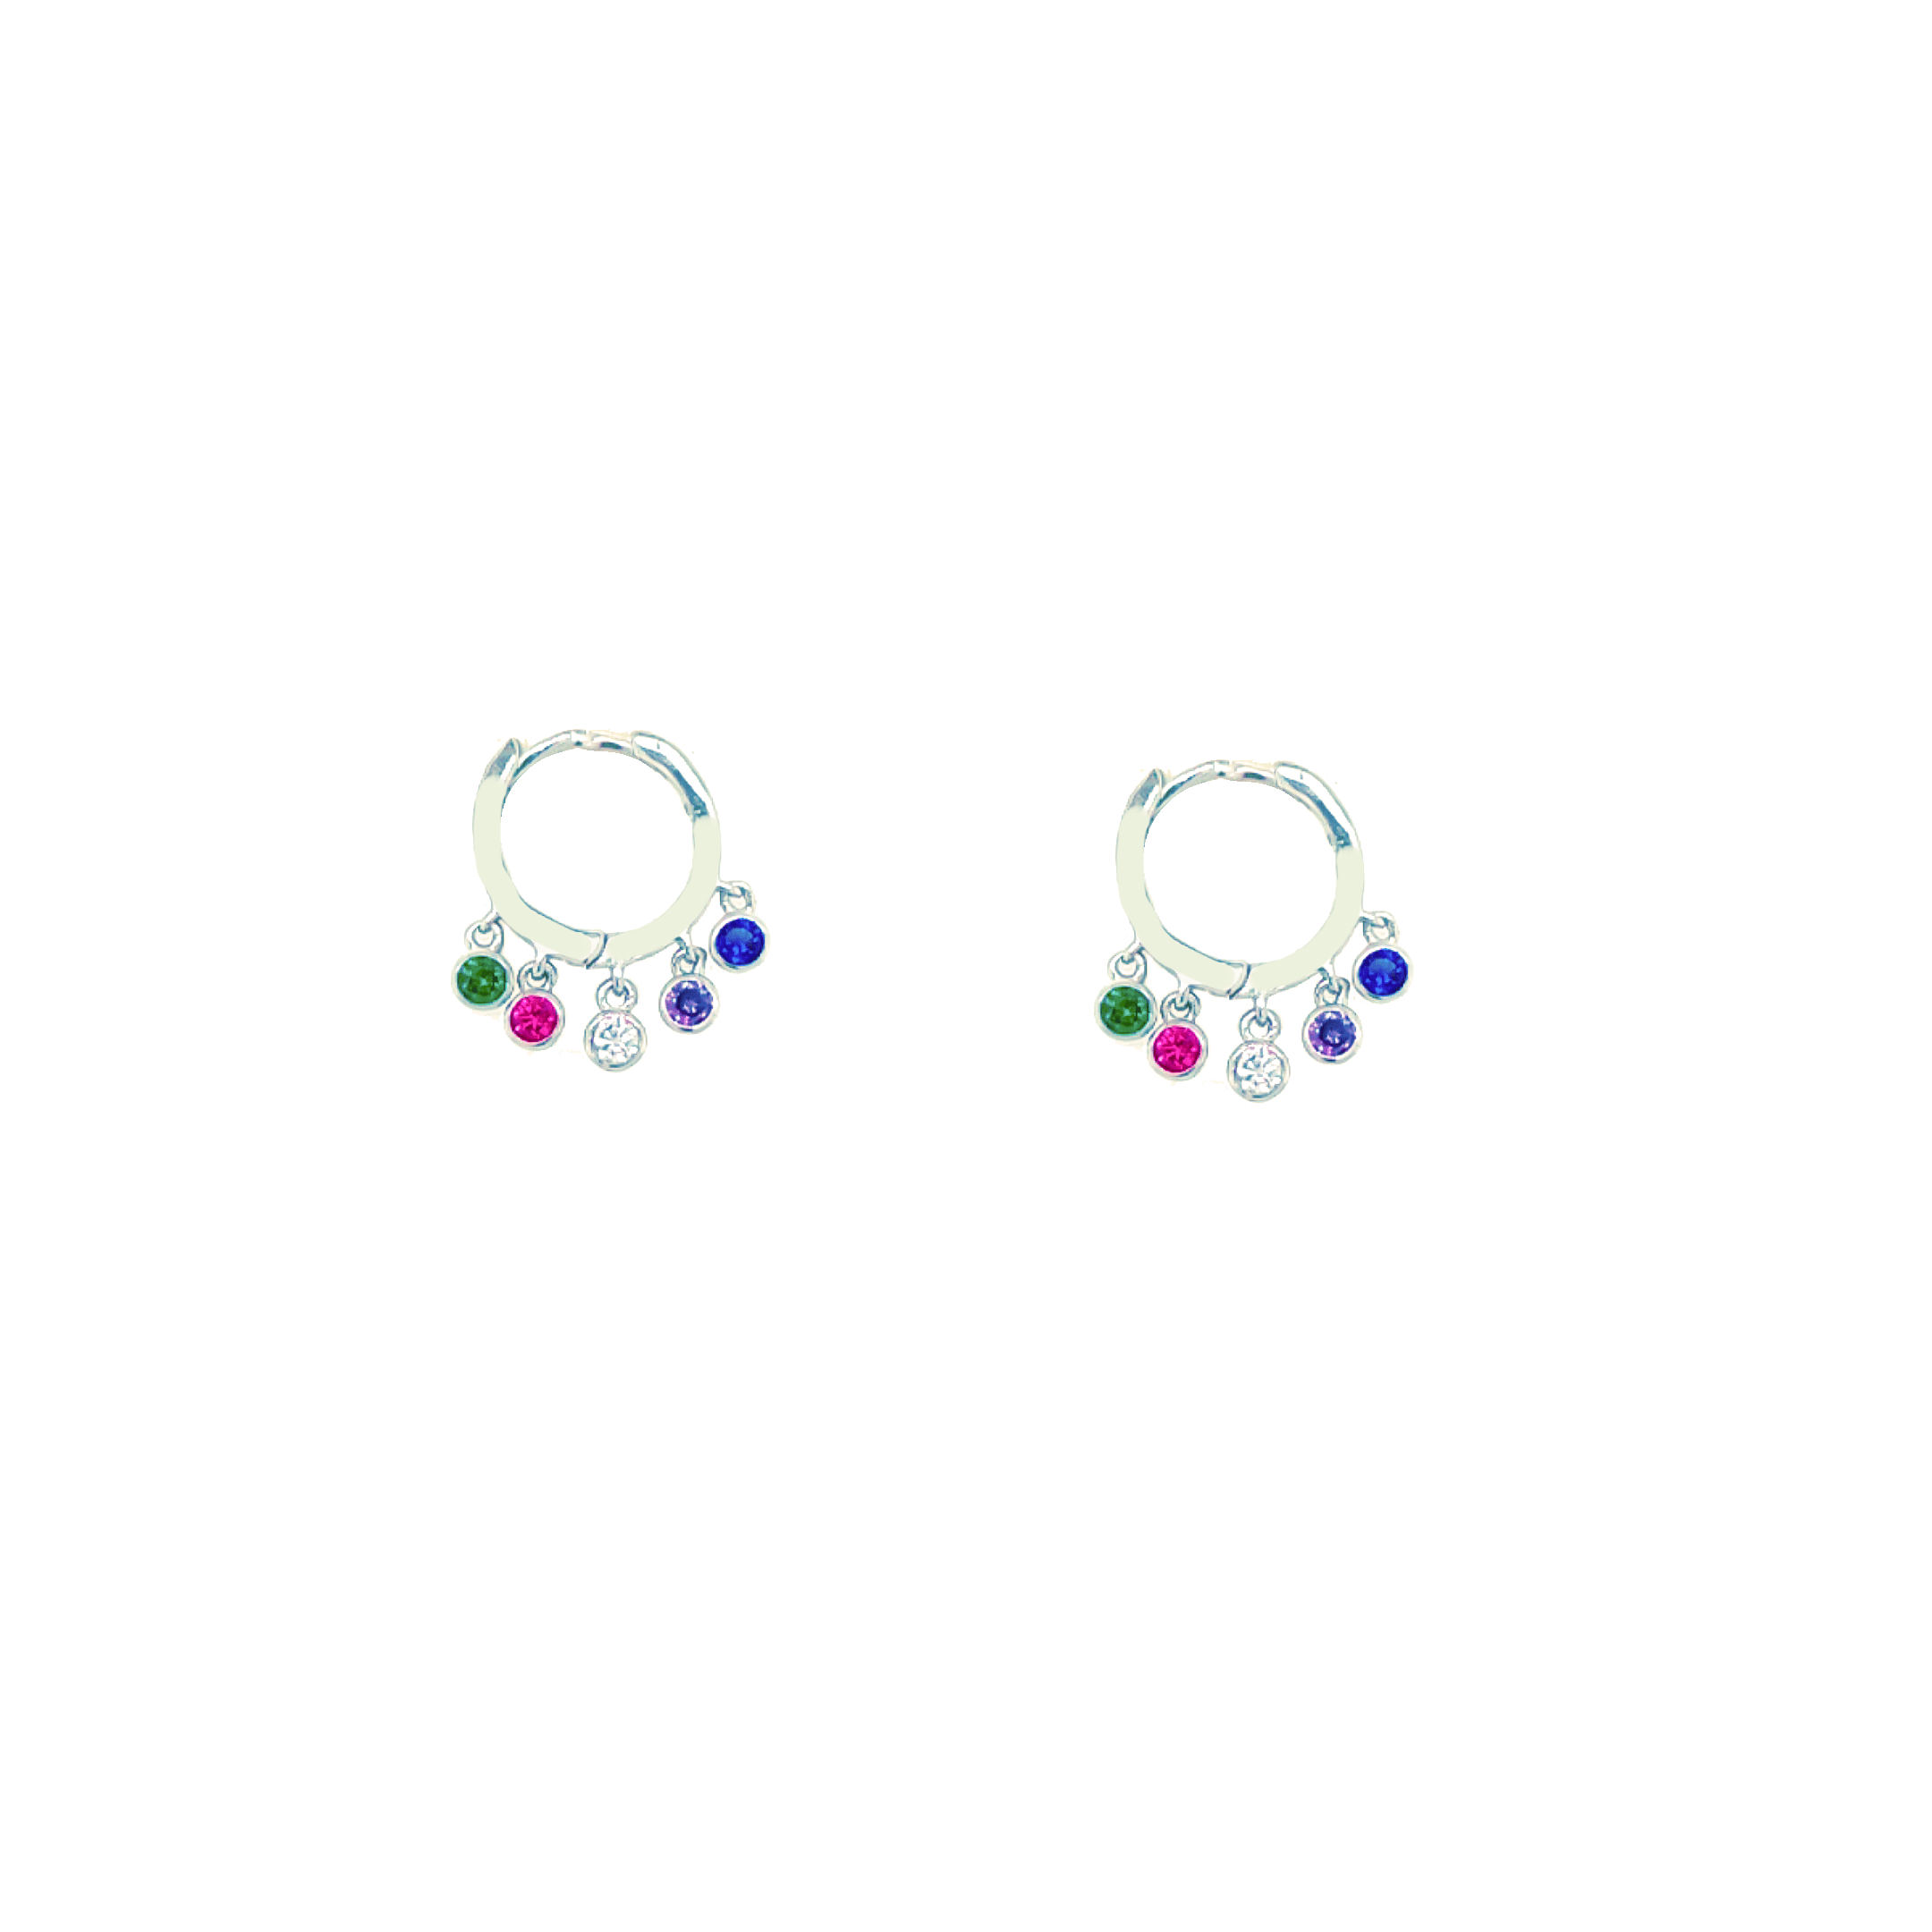 Asfour-Crystal-Sterling-Silver-925-Colorful-Round-Cloves-Earring-Silver